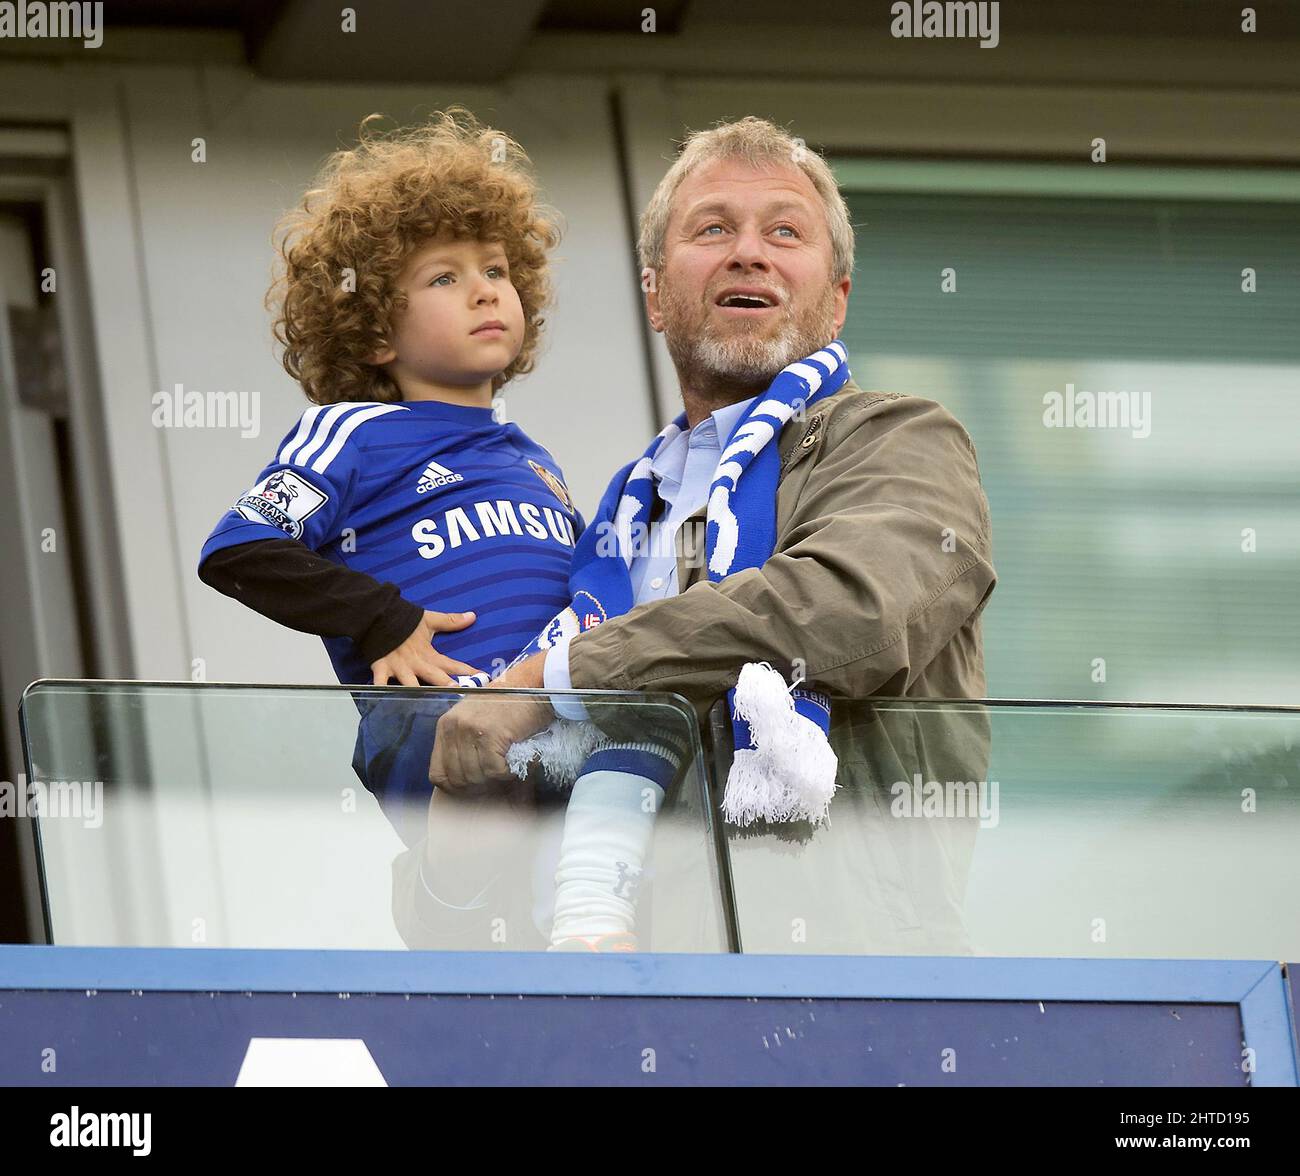 28 February 2022 - ROMAN ABRAMOVICH - CHELSEA FC   FILE PHOTO  ROMAN Abramovich CELEBRATES CHELSEA WINNING THE PREMIERSHIP TITLE WITH HIS SON AARON Chelsea v Crystal Palace - Barclays Premiership - Stamford Bridge 03/05/2015 Chelsea v Crystal Palace, Barclays Premier League, Stamford Bridge, London, Britain - 03 May 2015 Picture : © Mark Pain / Alamy Live News Stock Photo